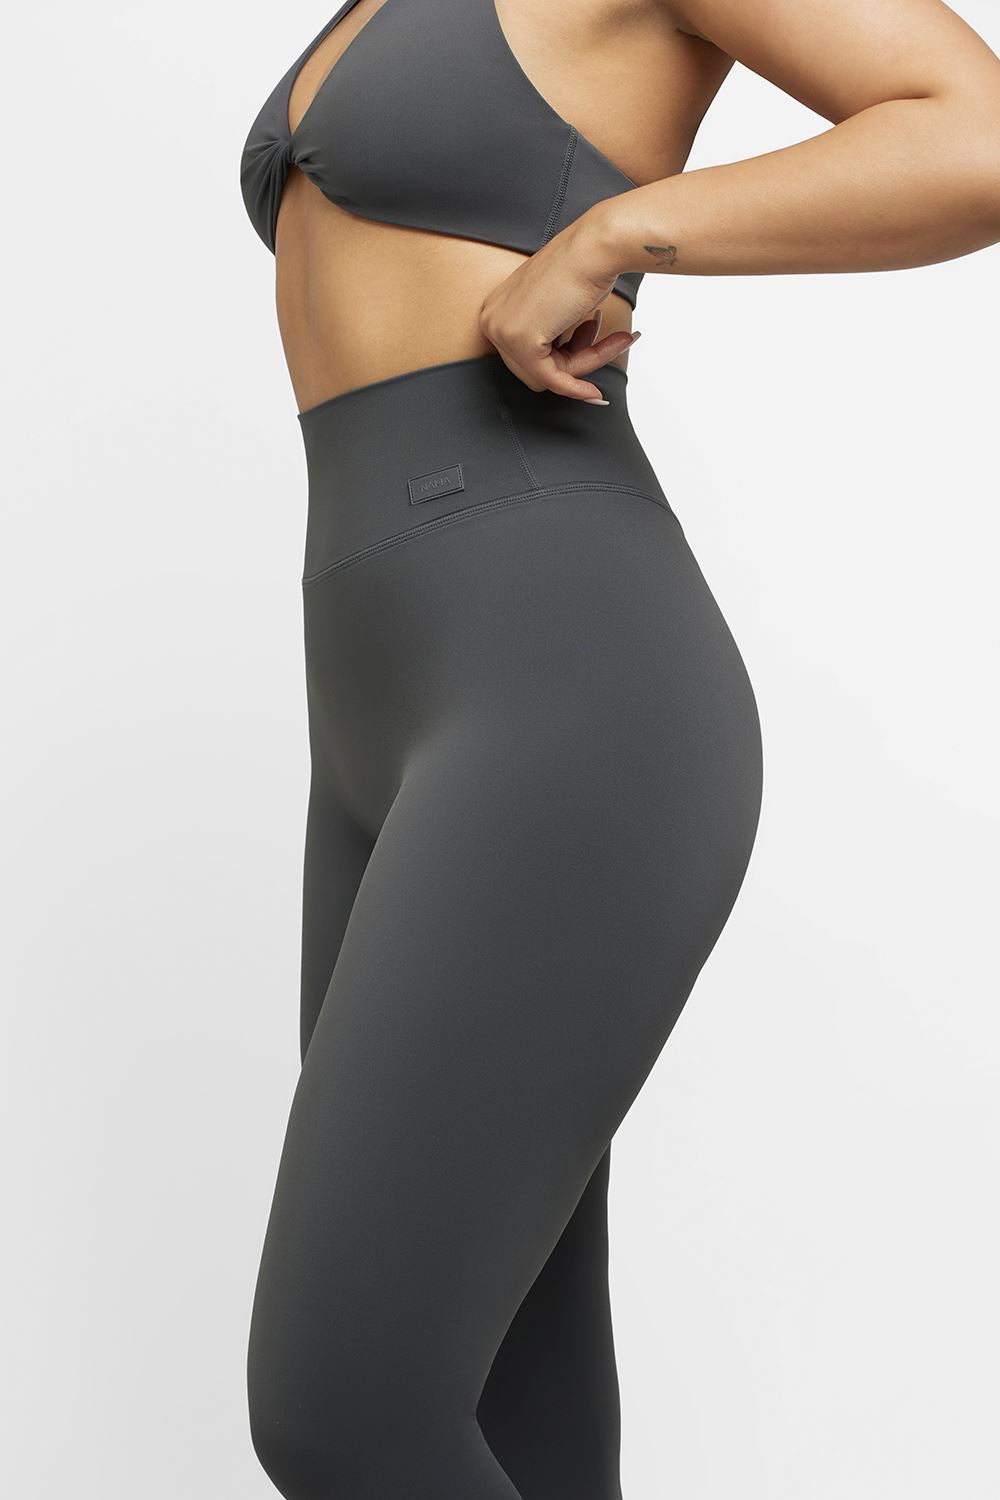 ₪104-High Waisted Leggings For Women Buttery Soft Tummy Control